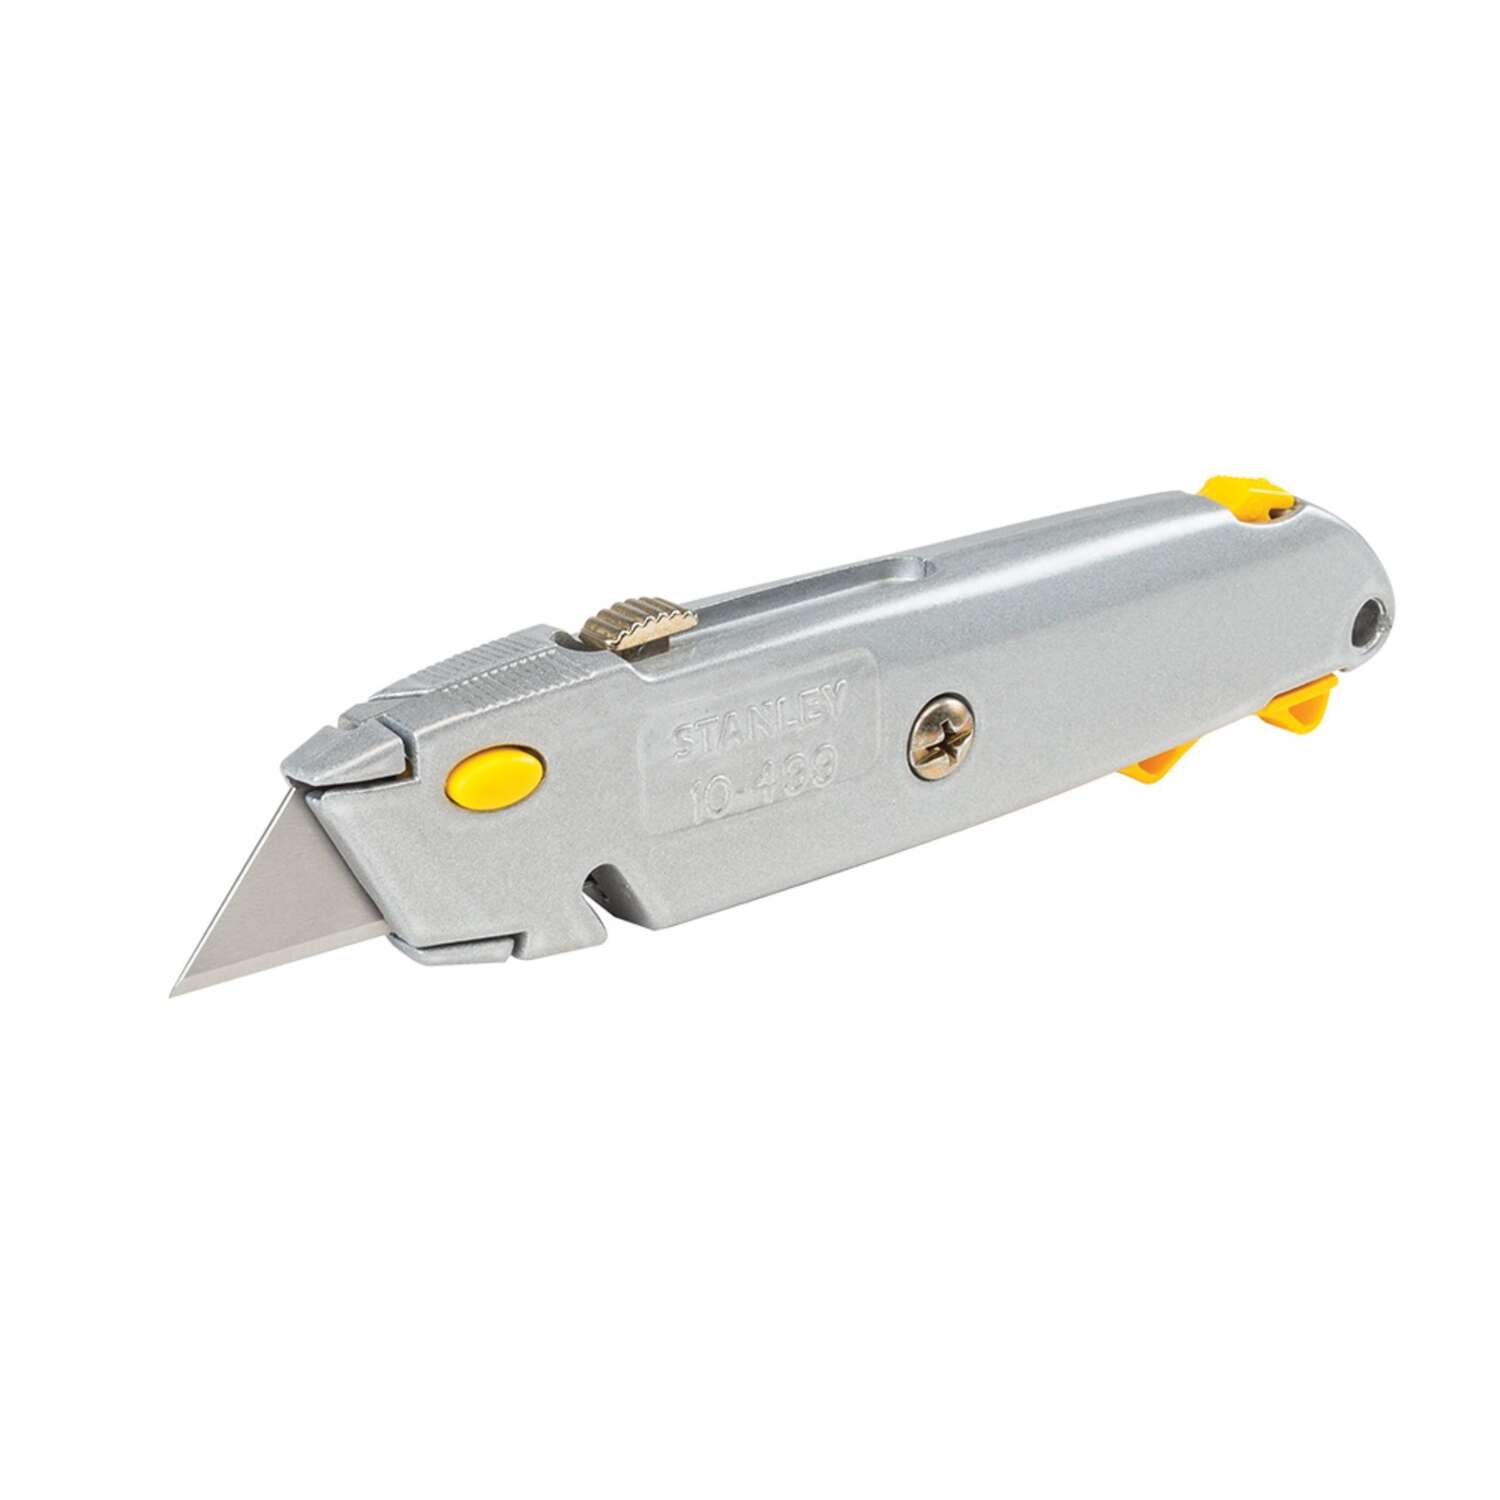 Stanley QuickChange 6-3/8" Retractable Utility Knife (Gray) $4 at Ace Hardware w/ Free Store Pickup